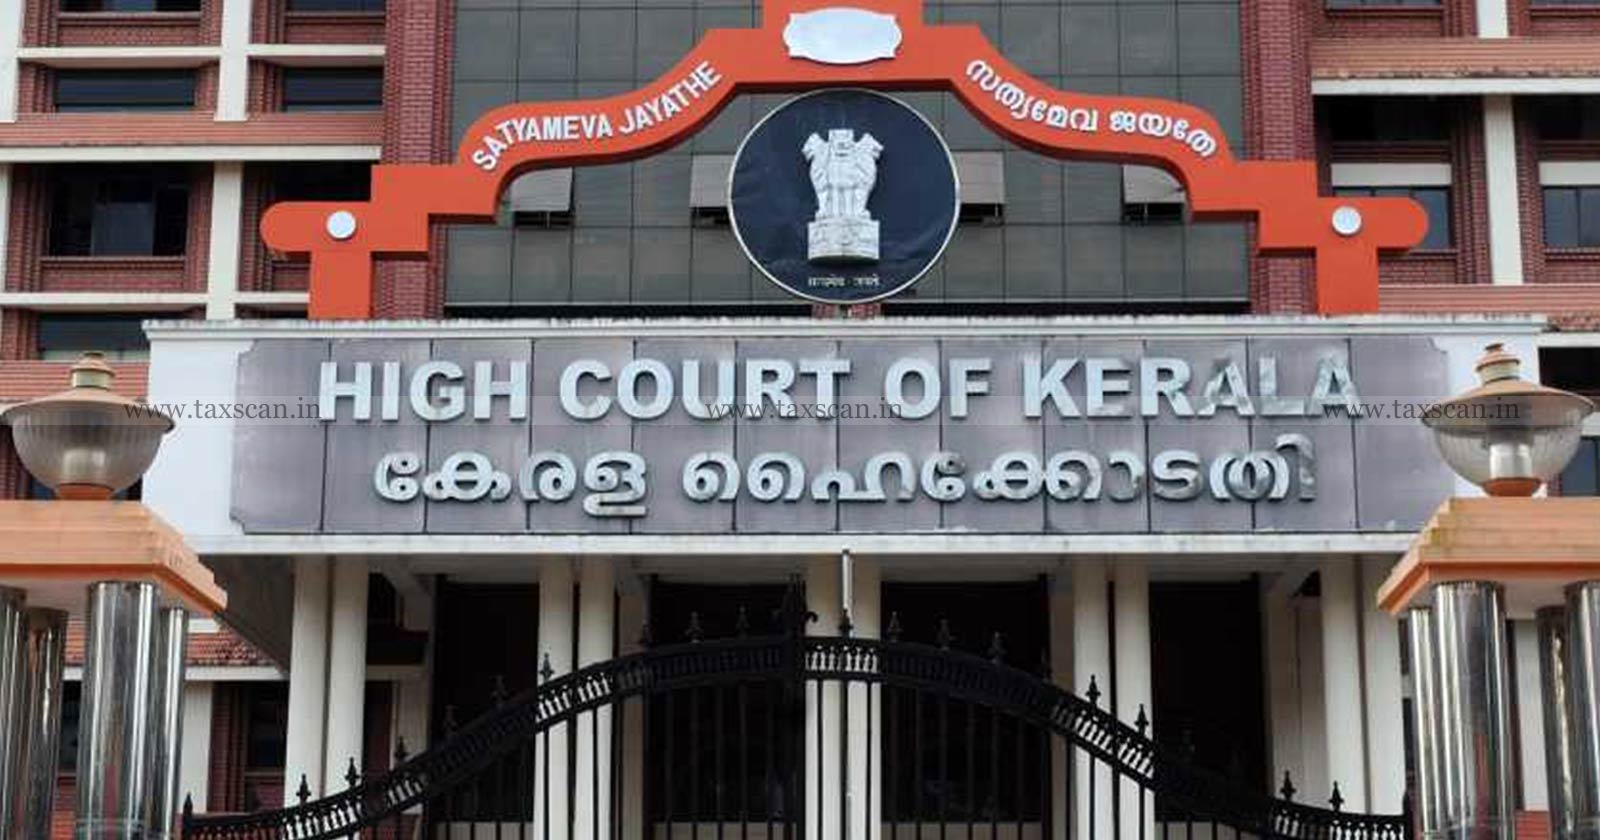 Kerala Govt notifies Rules of High Court of Kerala - Public Interest Litigations - Rules of High Court of Kerala - High Court of Kerala - taxscan